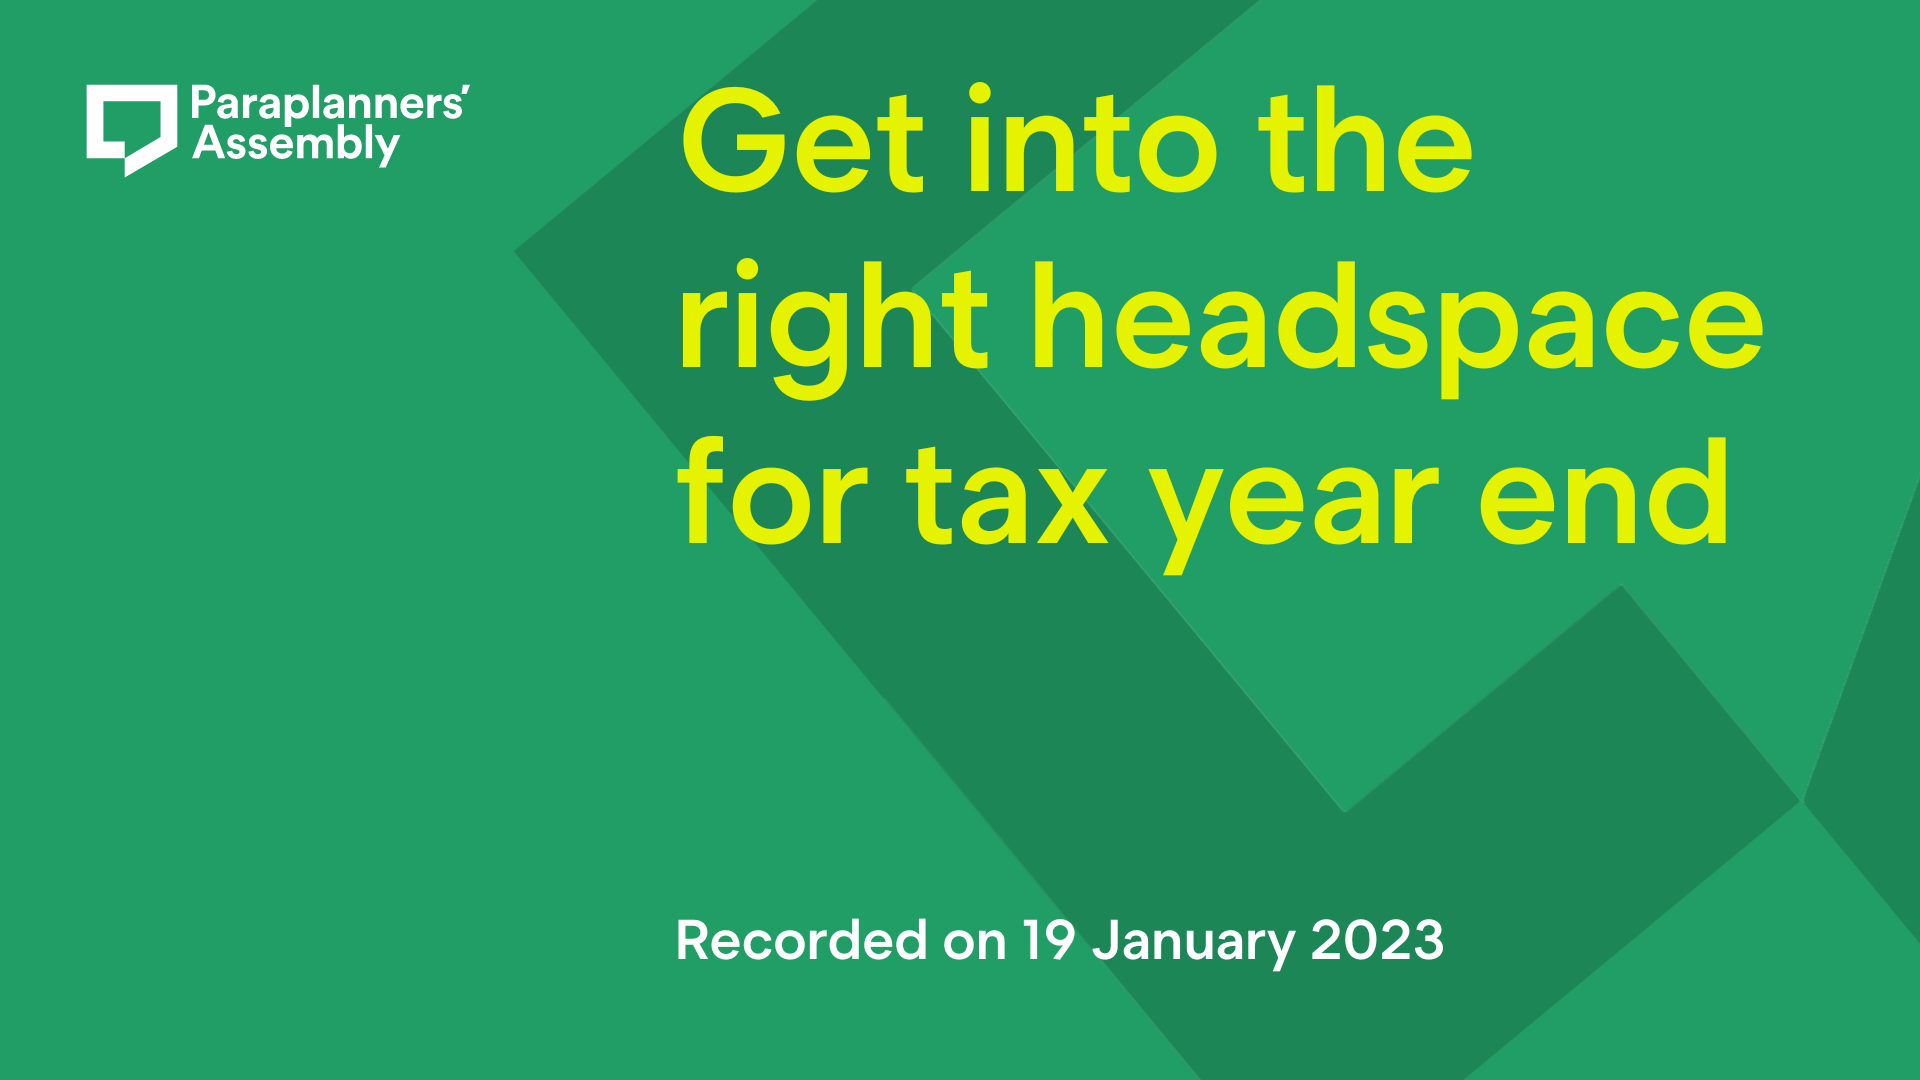 Get into the right headspace for tax year end. Recorded on 19 January 2023.